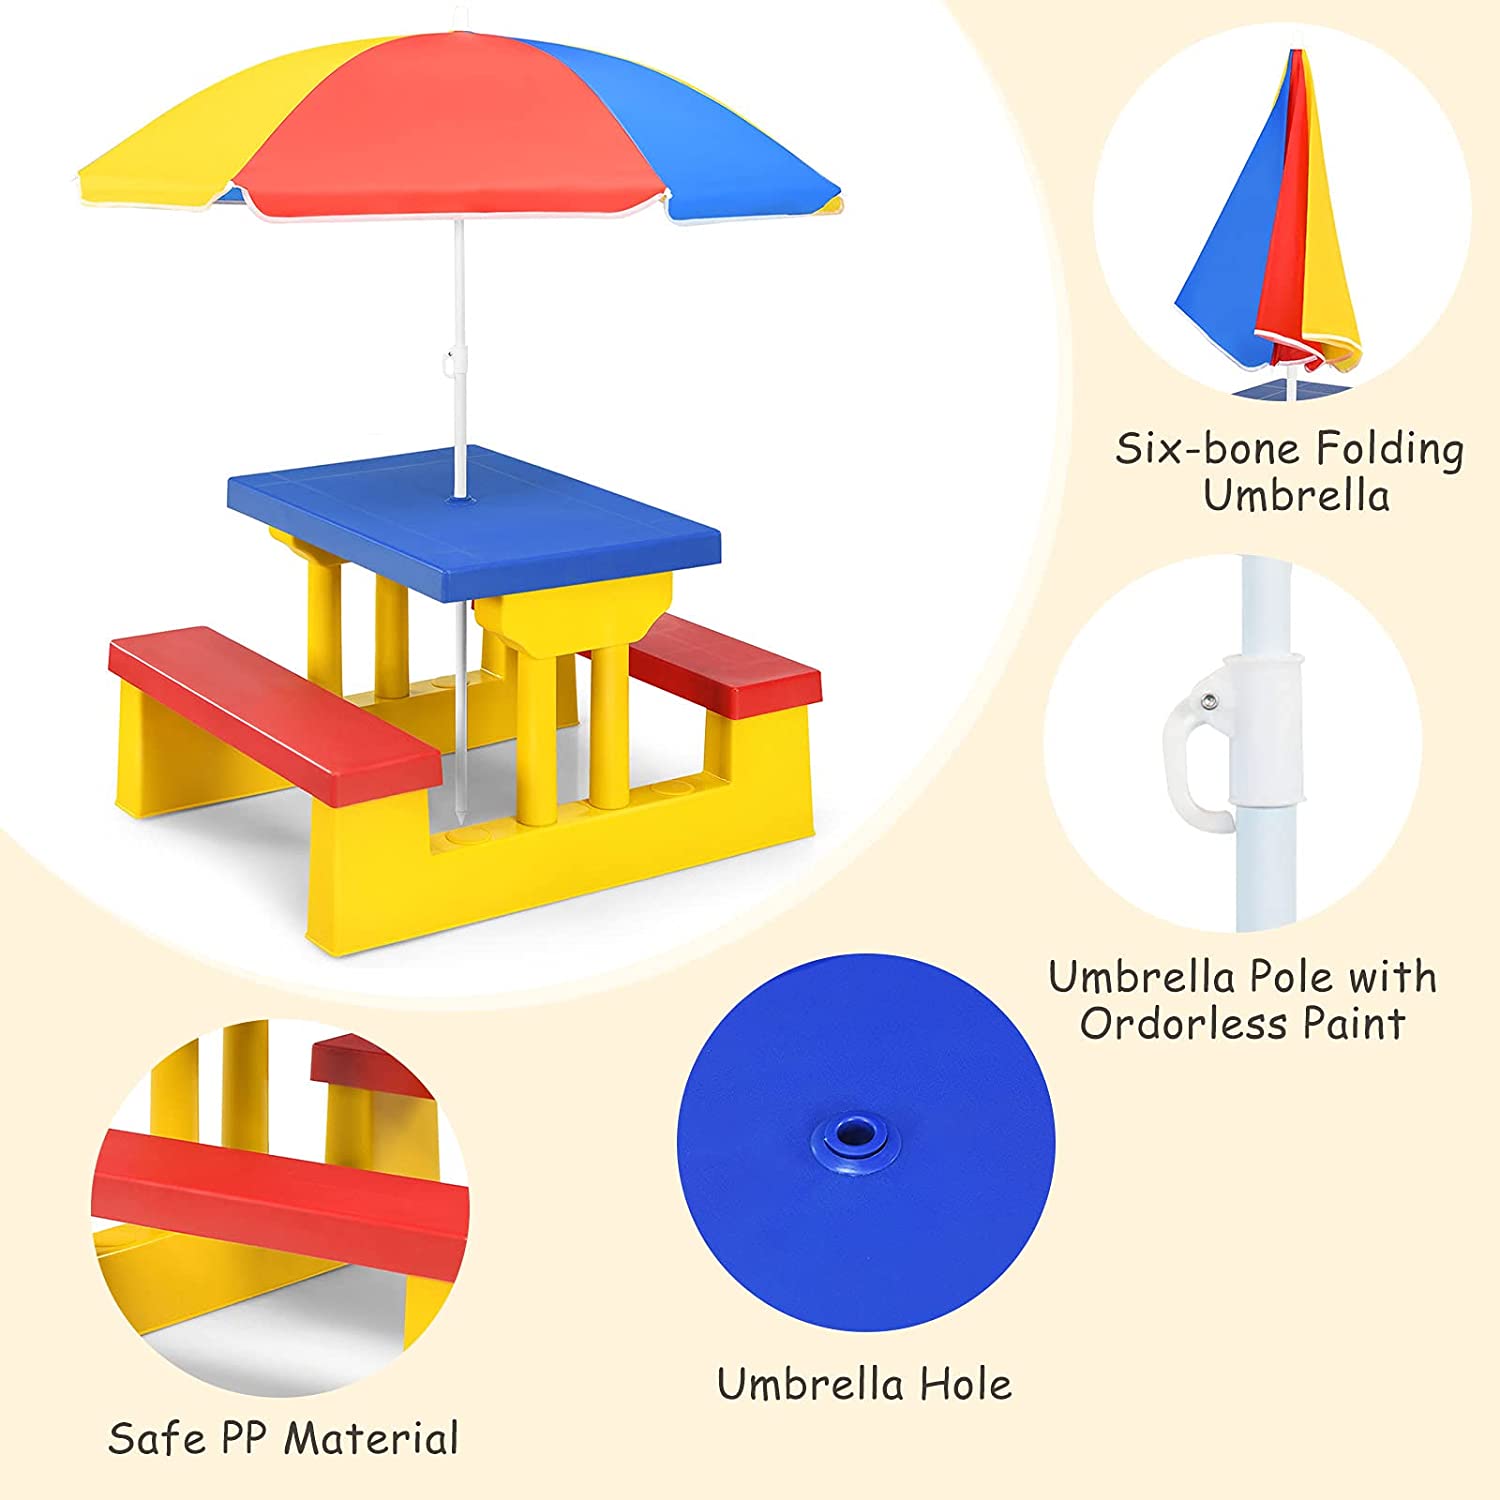 Kids Folding Picnic Table with Removable Folding Umbrella